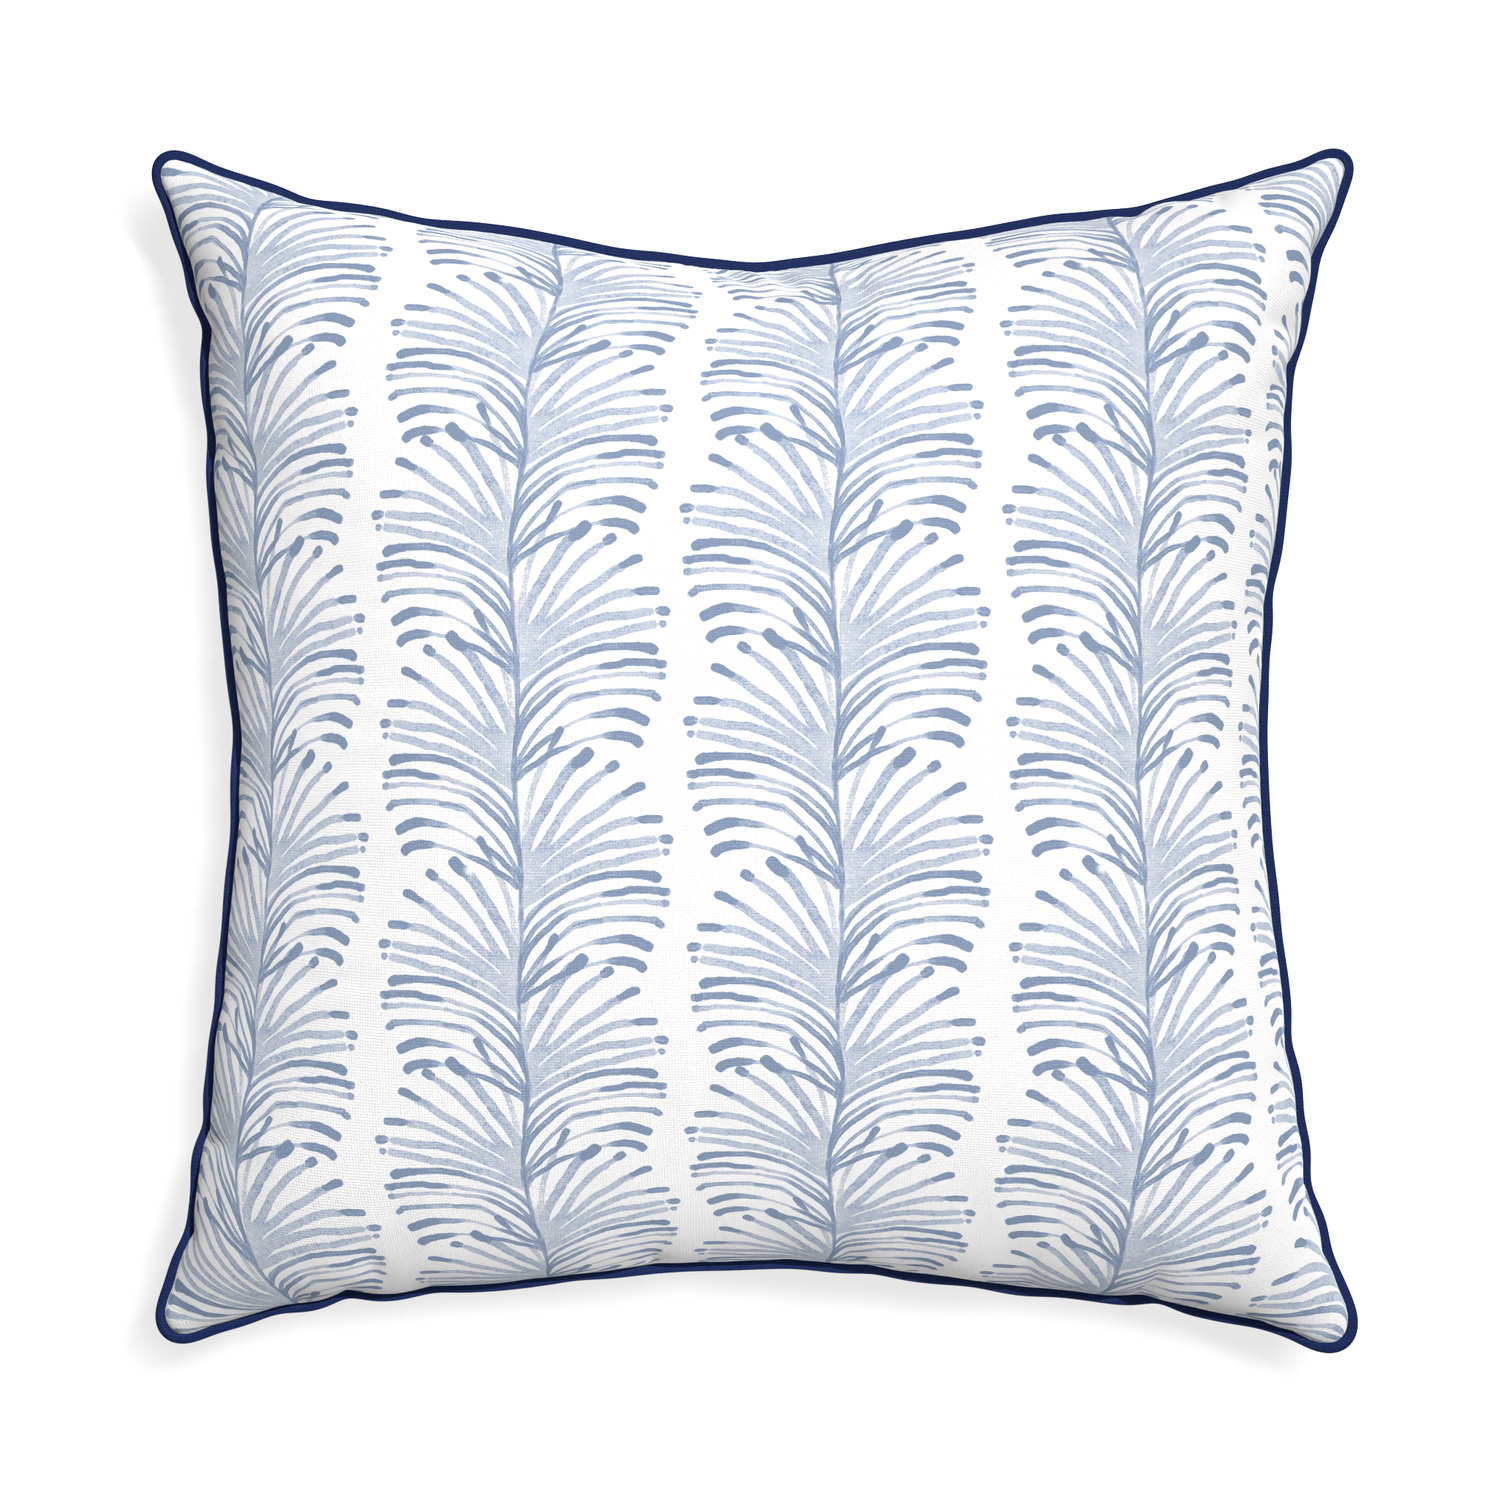 Euro-sham emma sky custom pillow with midnight piping on white background